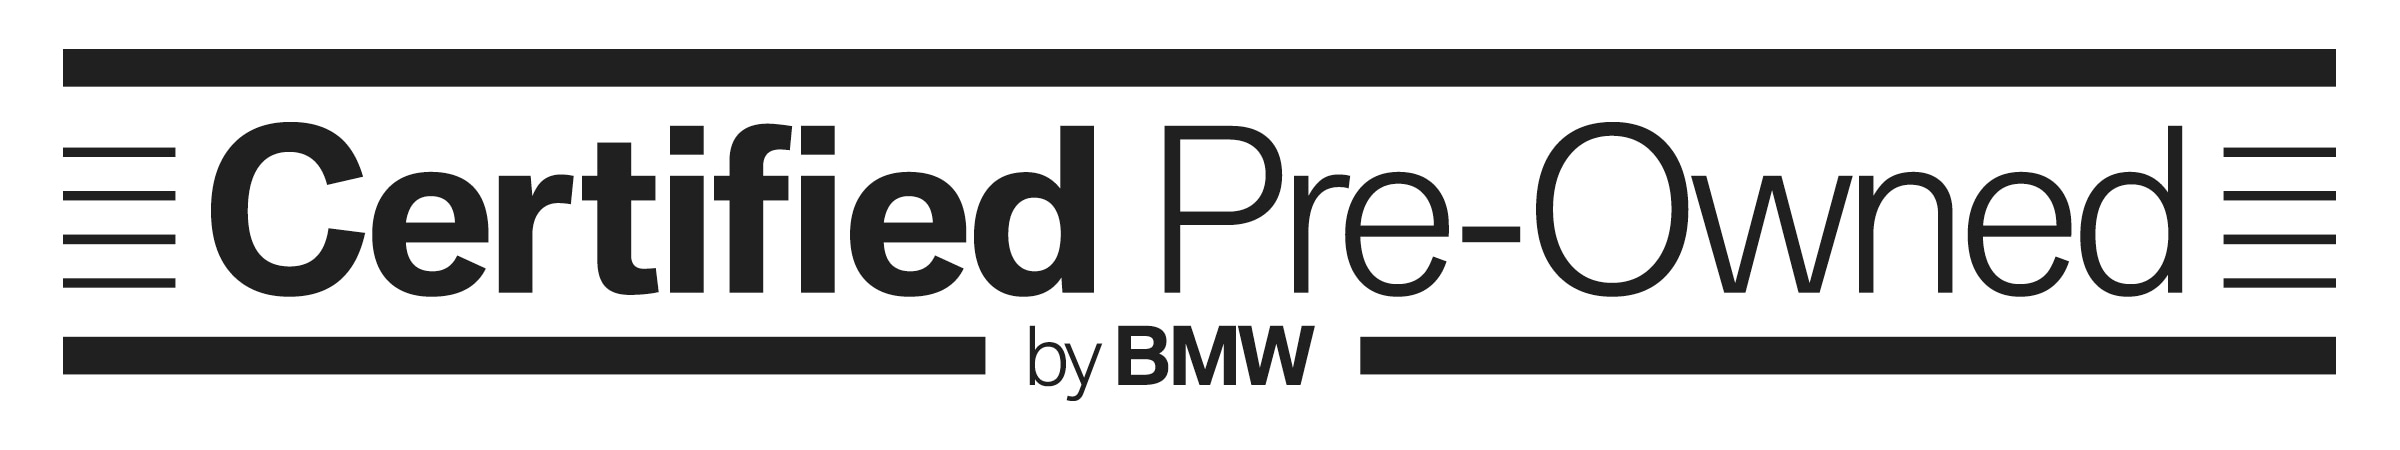 Bmw certified pre owned financing